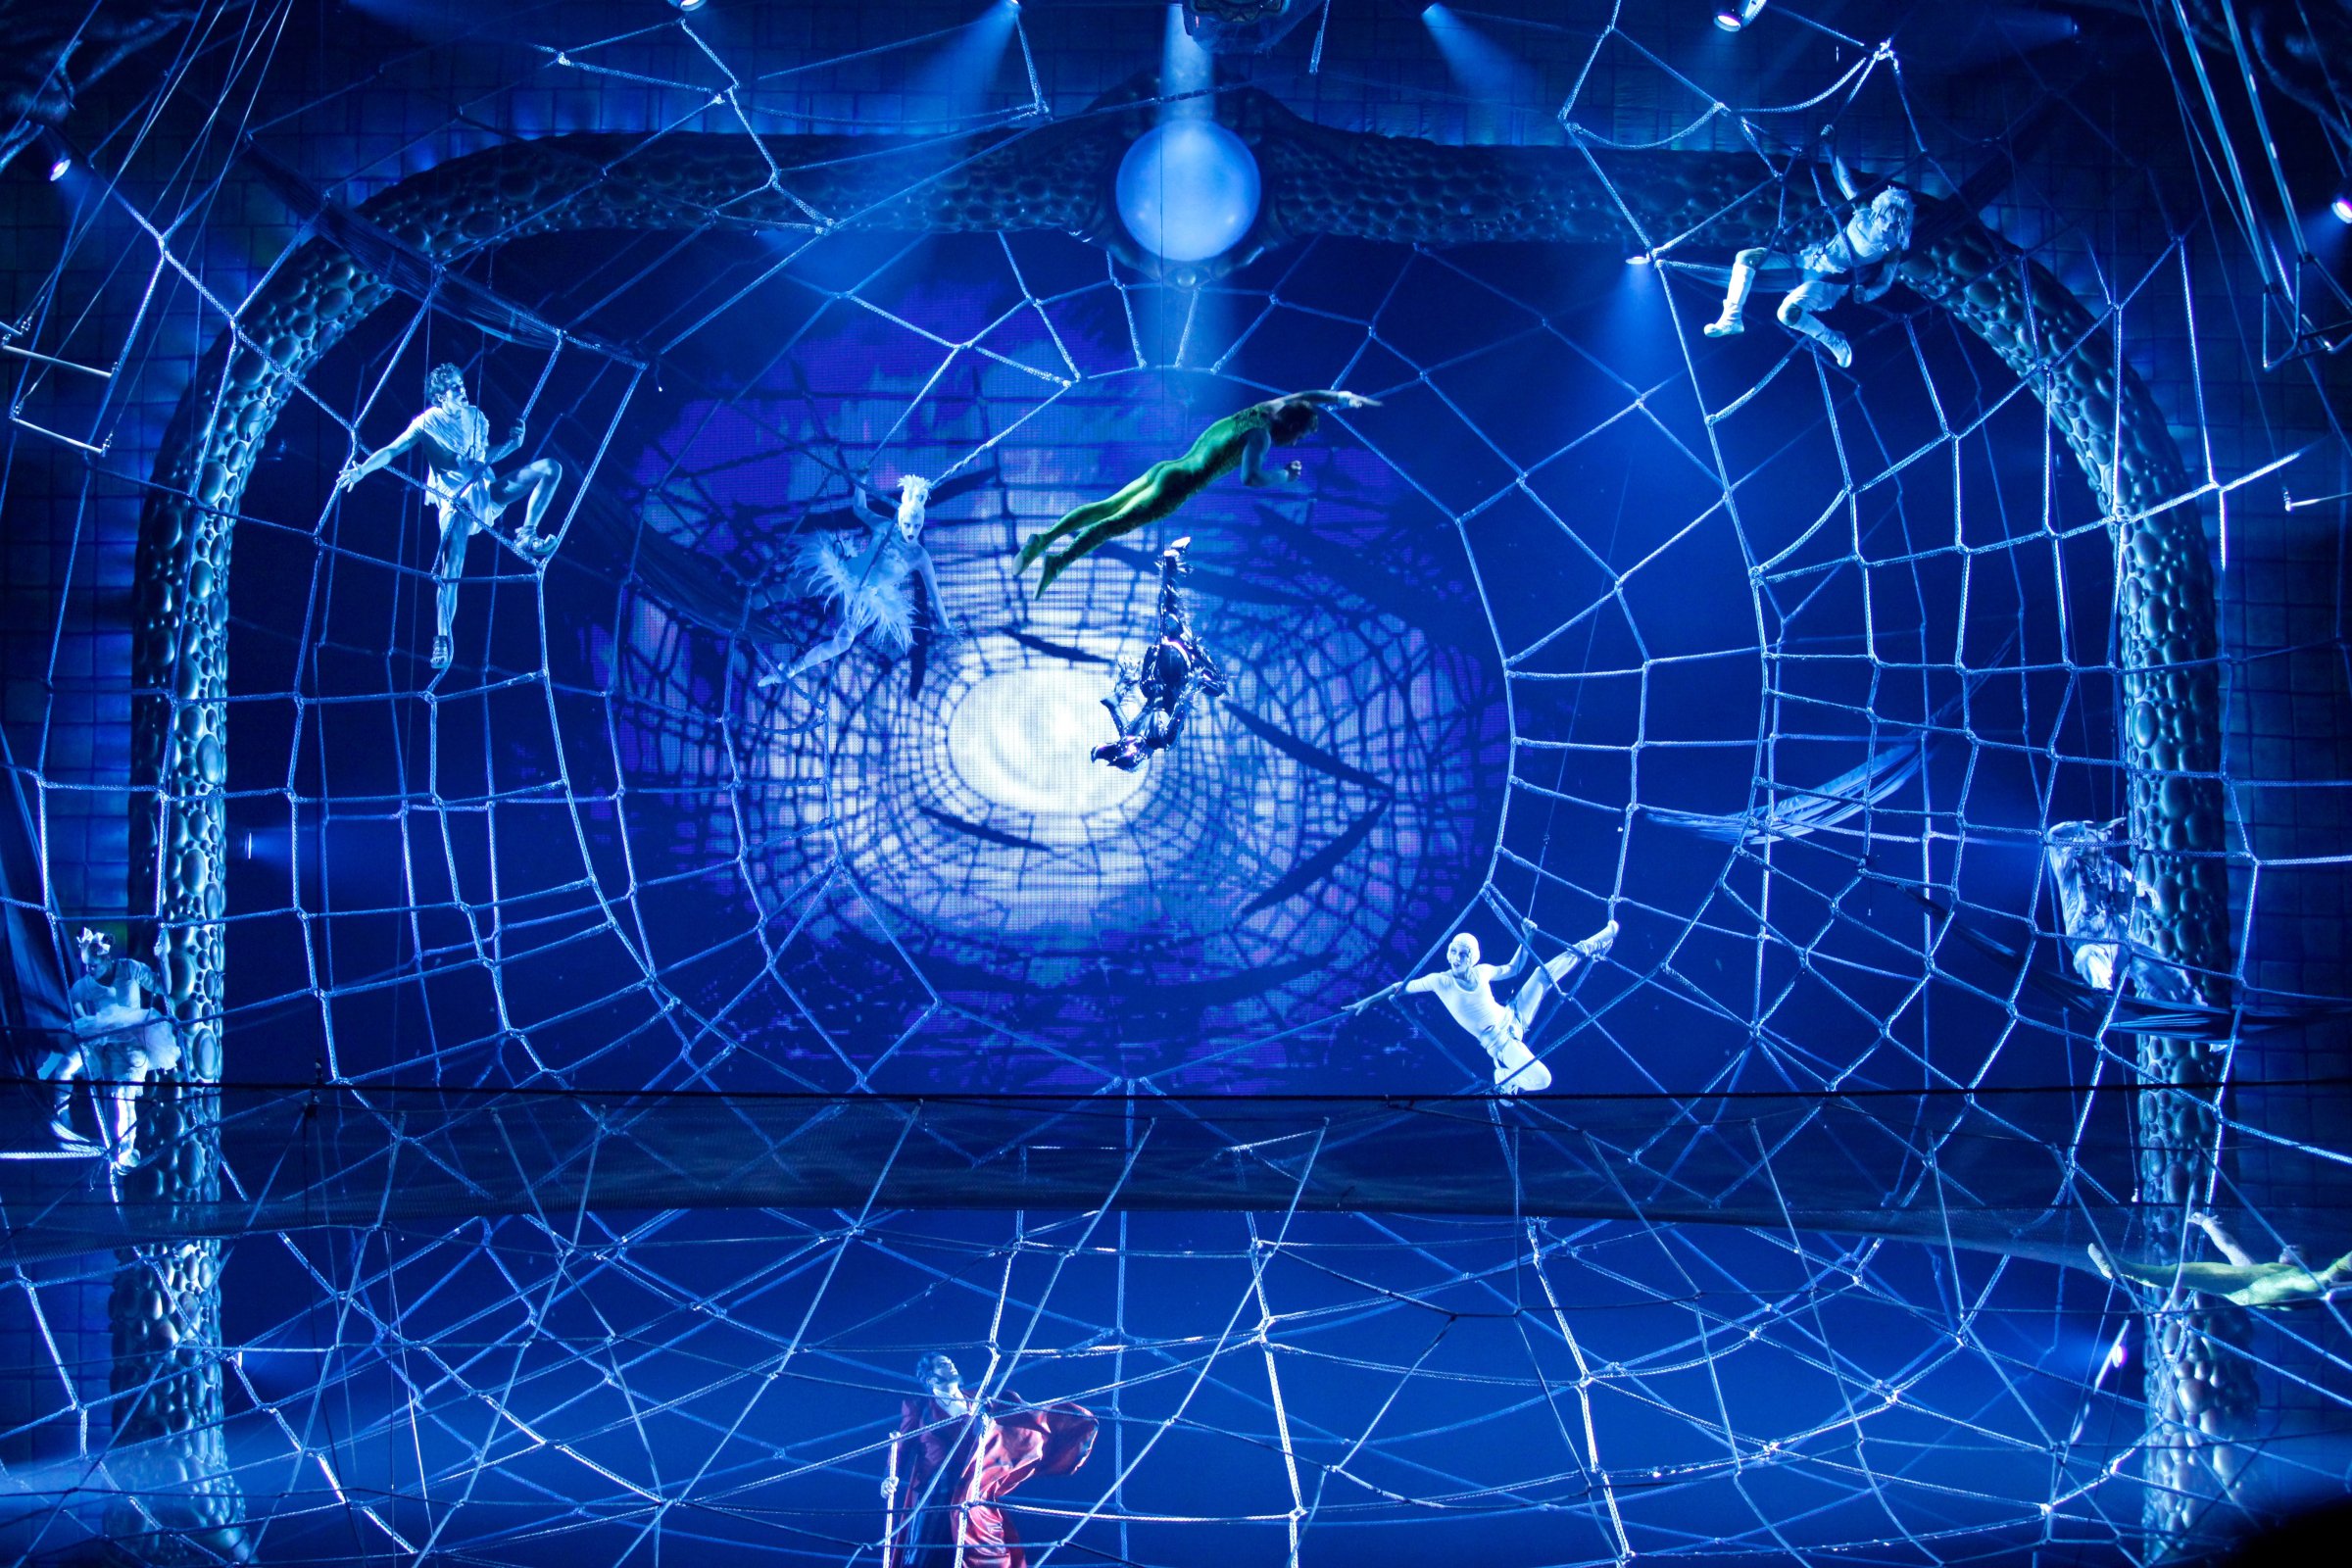 Cirque du Soleil performance at Radio City Music Hall in New York in 2011.